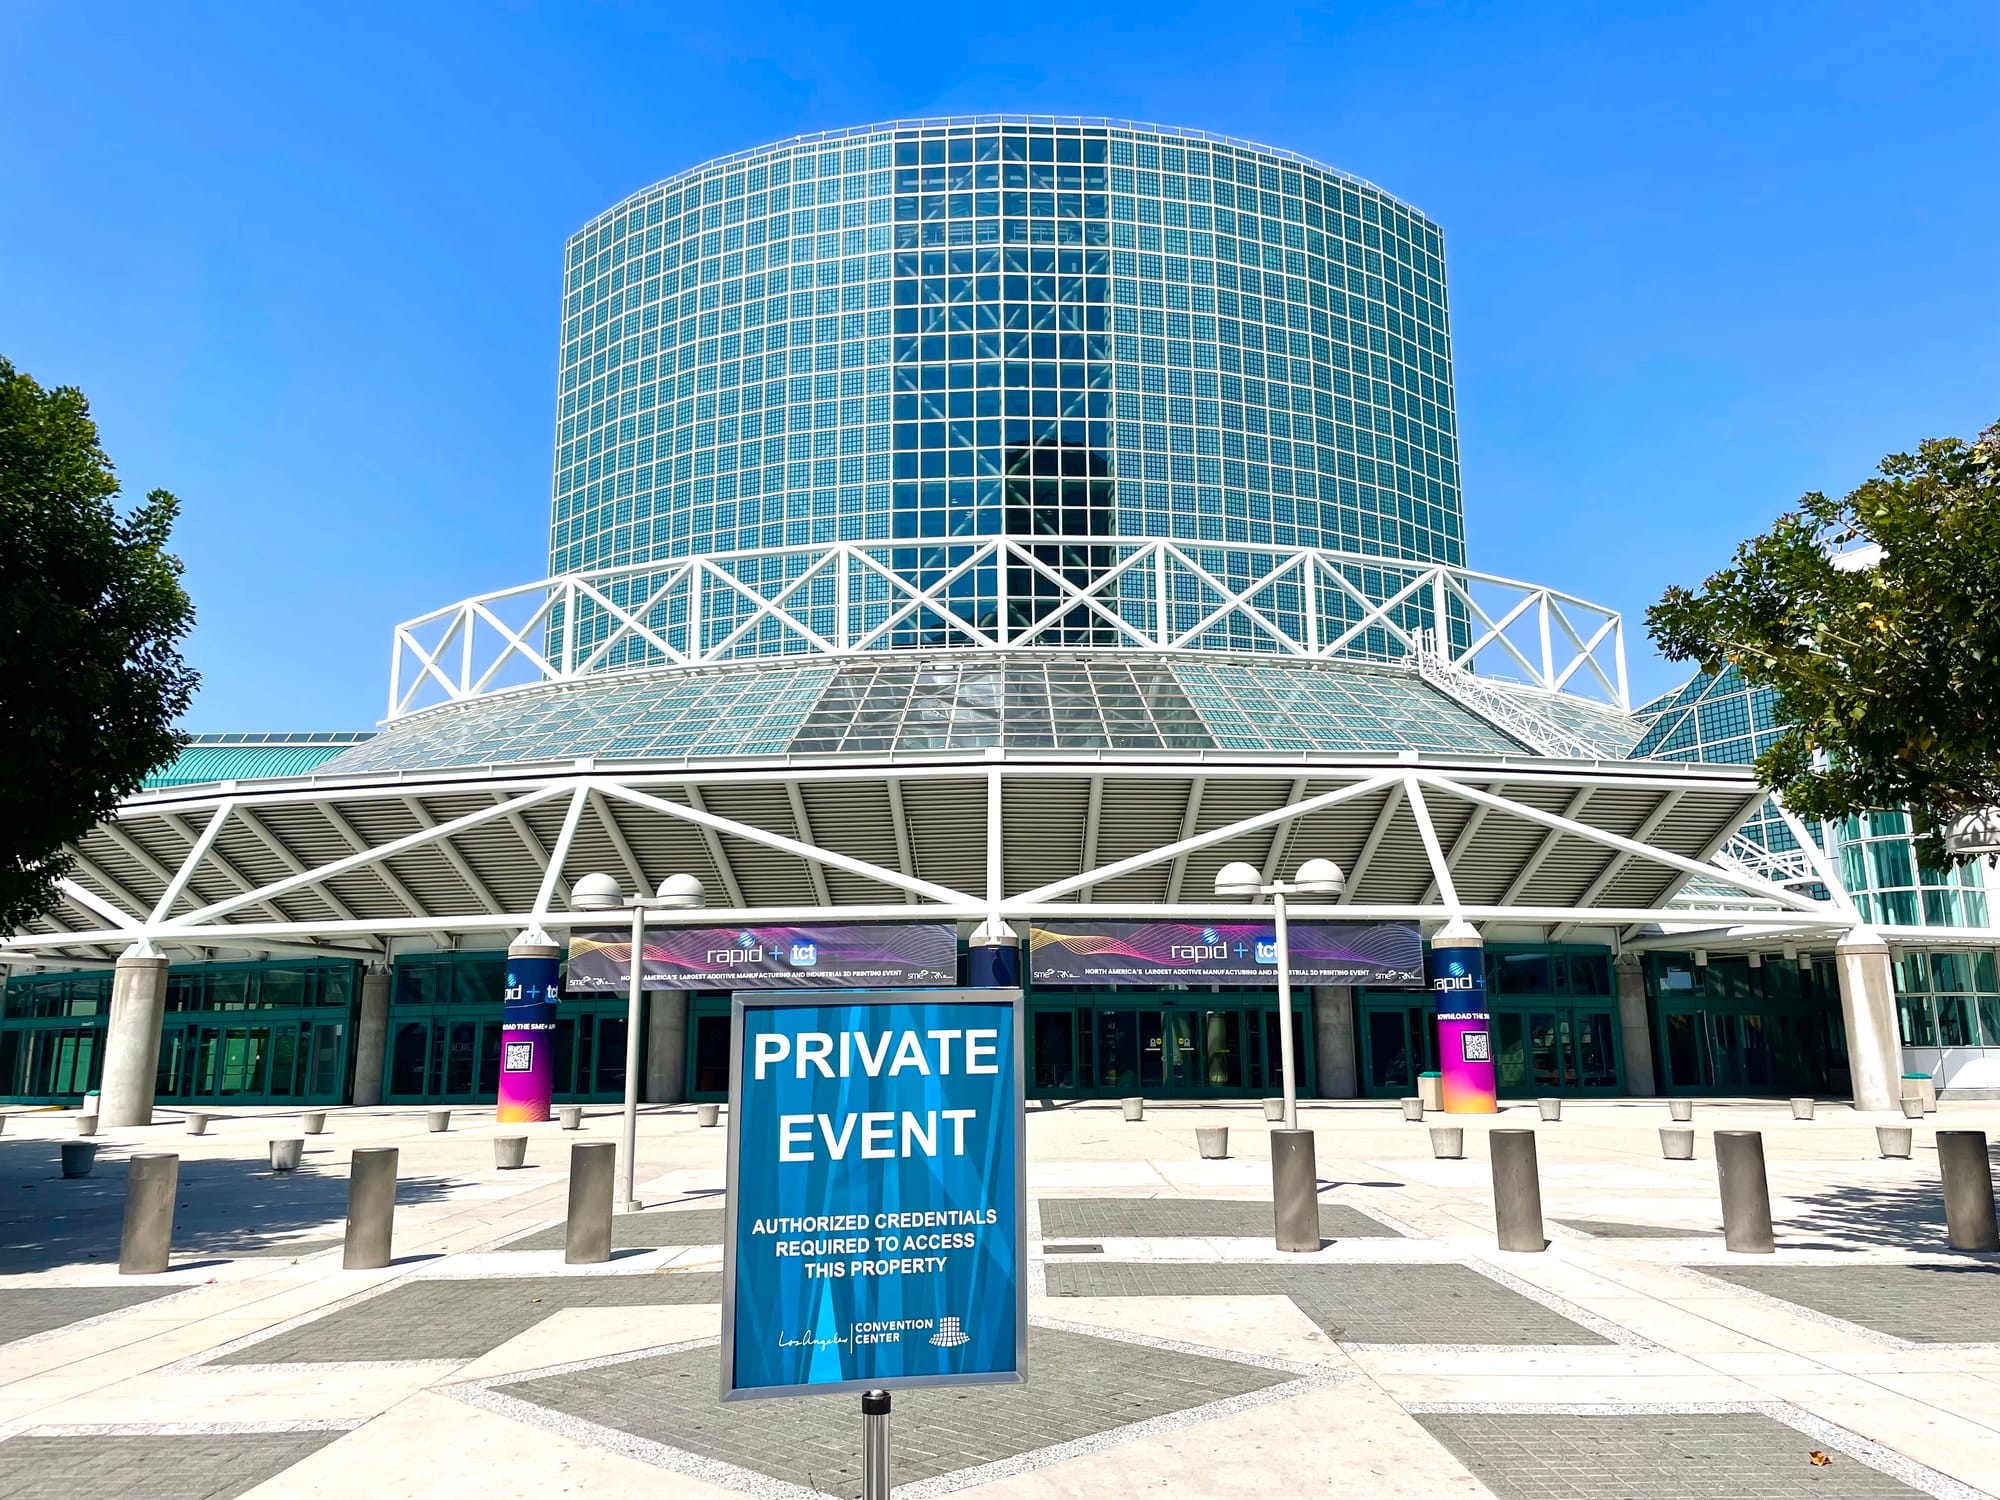 The convention center atrium with tall walls of curved greenish fake glass block and a sign that shows "private event" convention